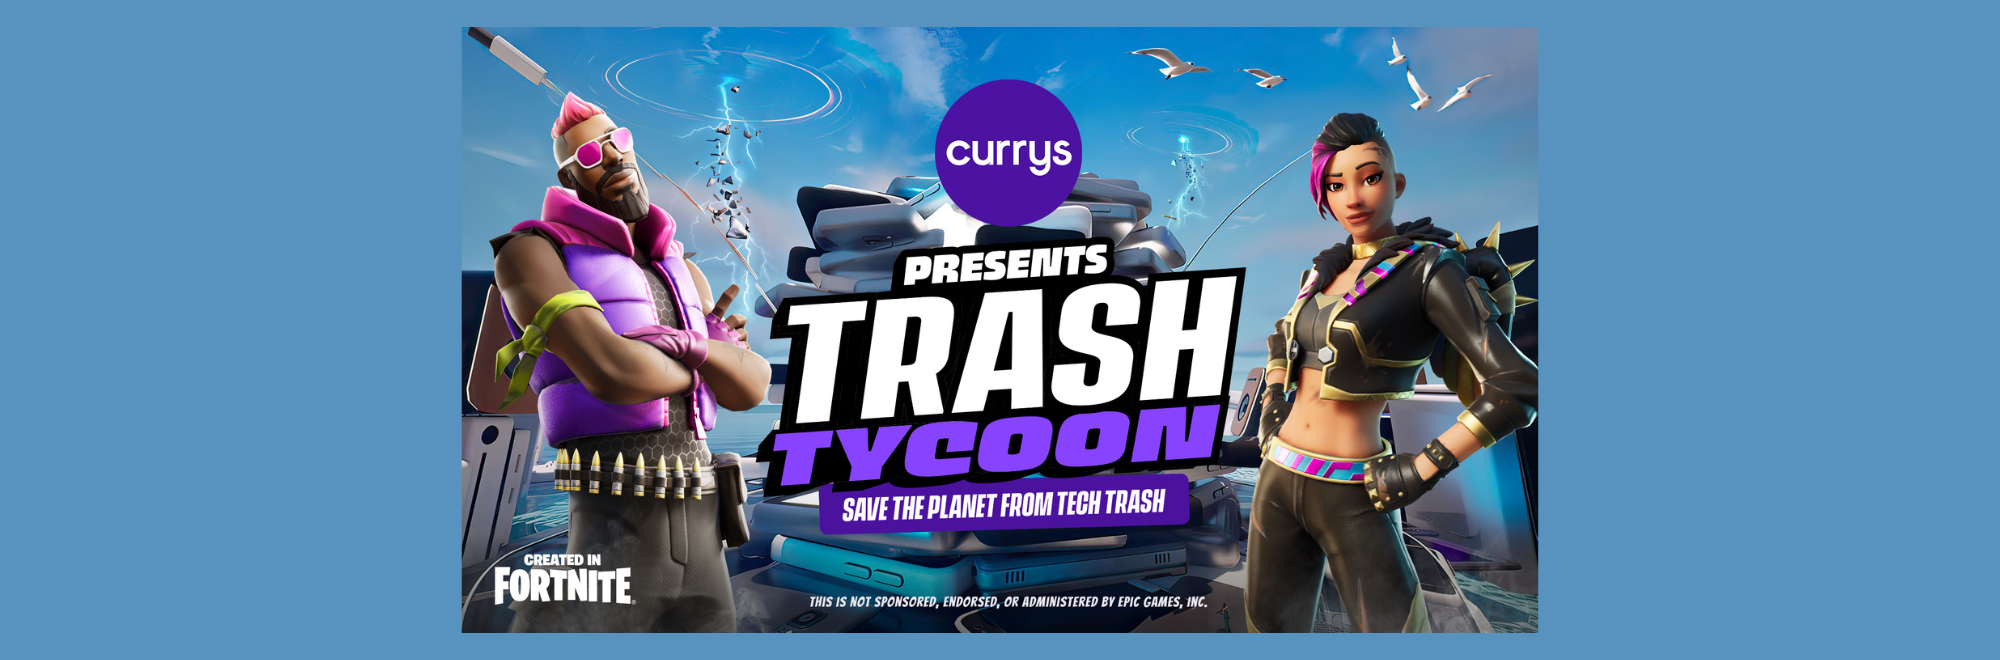 Currys join forces with Fortnite to tackle the e-waste crisis